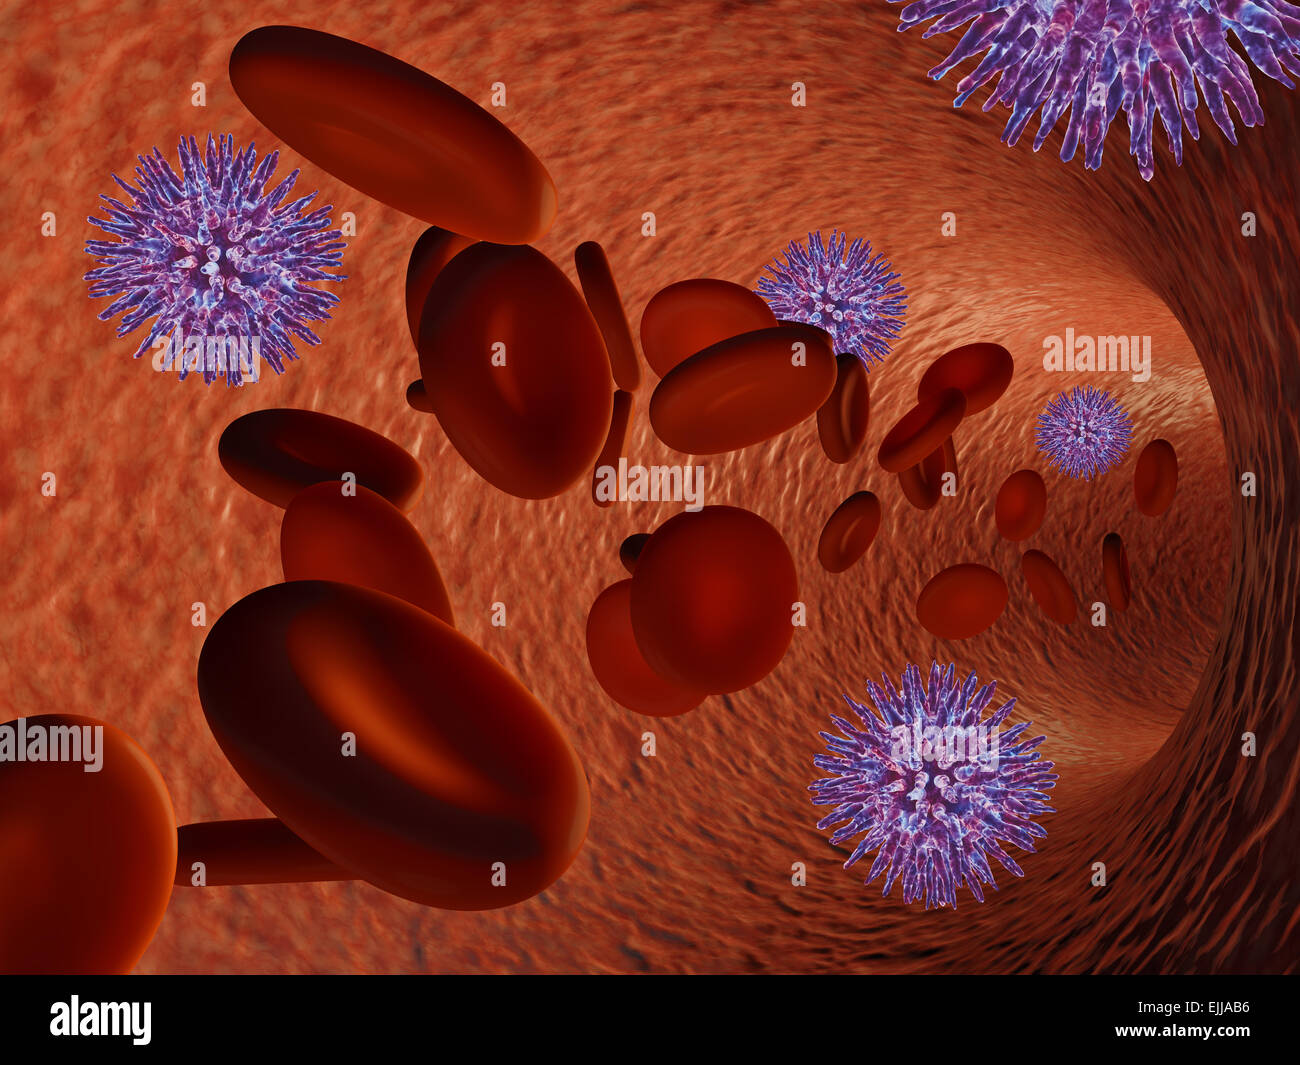 virus in the bloodstream of a blood vessel Stock Photo